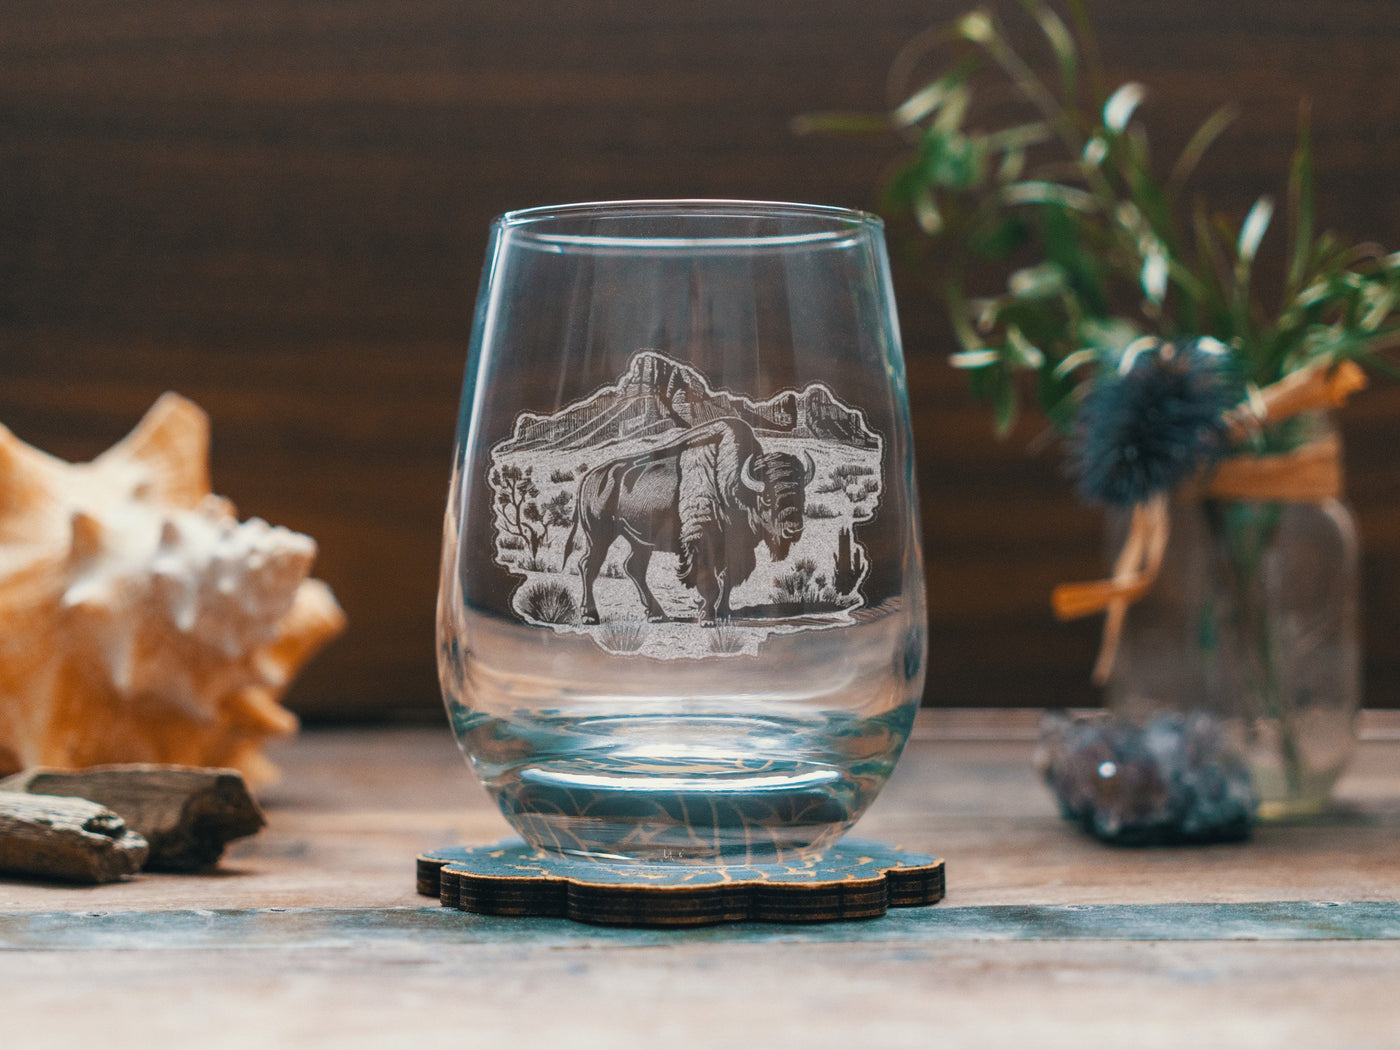 Western Buffalo Scene Glasses | Personalized etched glassware for beer, whiskey, wine & cocktails. Ranch Desert Scene, Southwestern Decor.